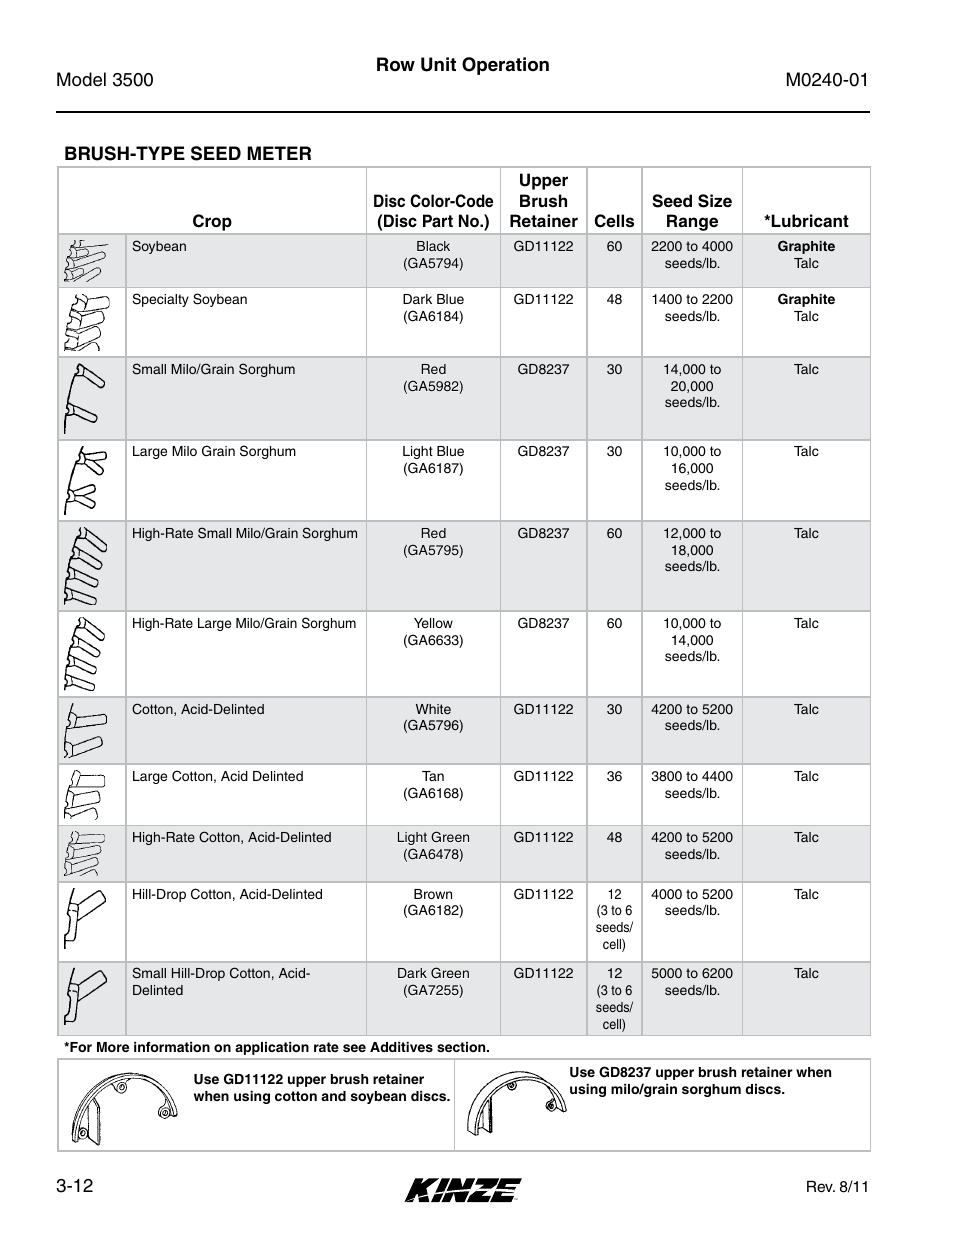 Brush-type seed meter, Brush-type seed meter -12, Row unit operation brush-type seed meter | Kinze 3500 Lift and Rotate Planter Rev. 7/14 User Manual | Page 46 / 140